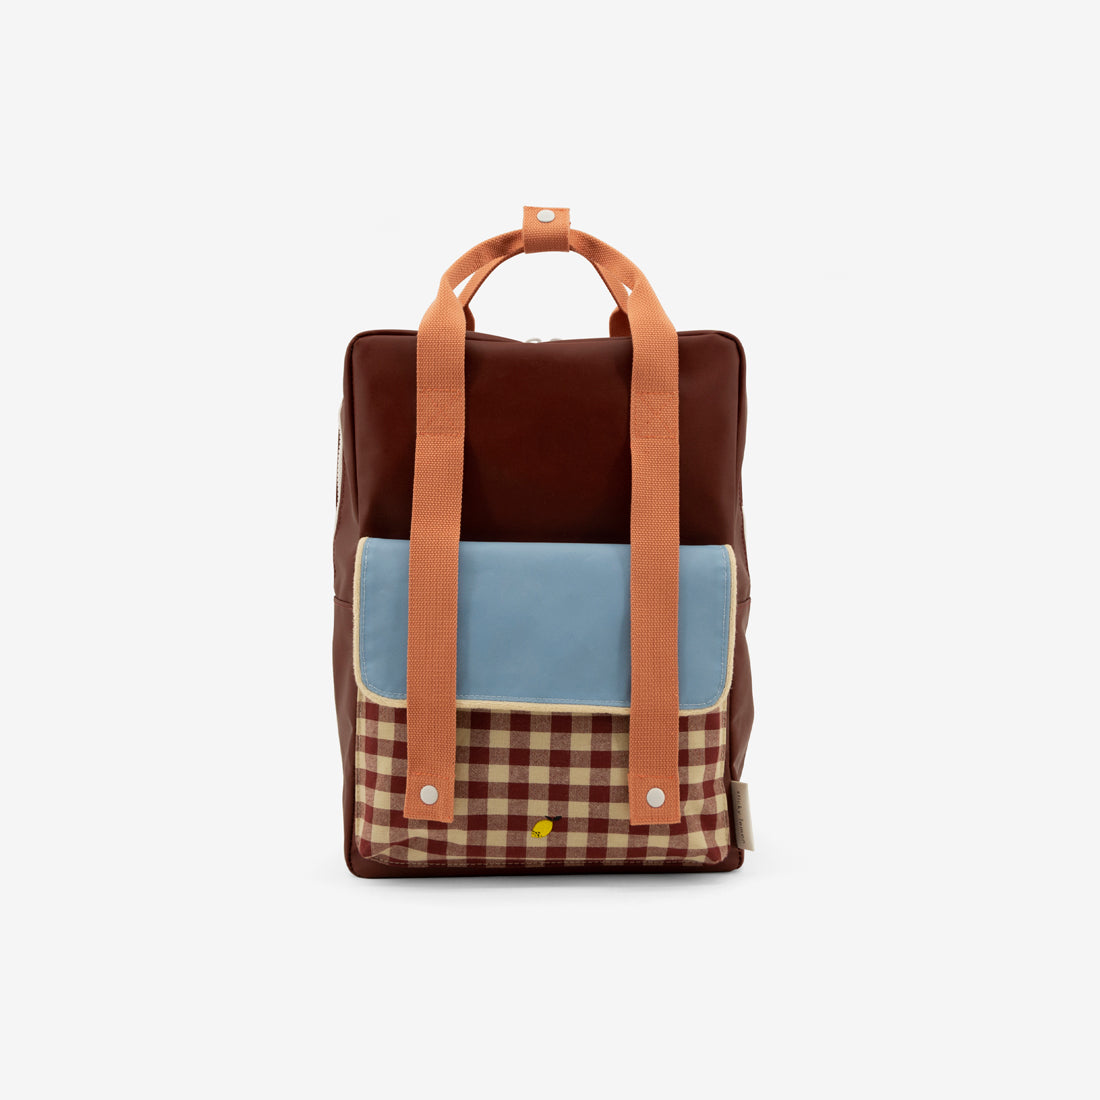 Backpack/Diaper Bag - Gingham Deluxe Cherry Berry Blue